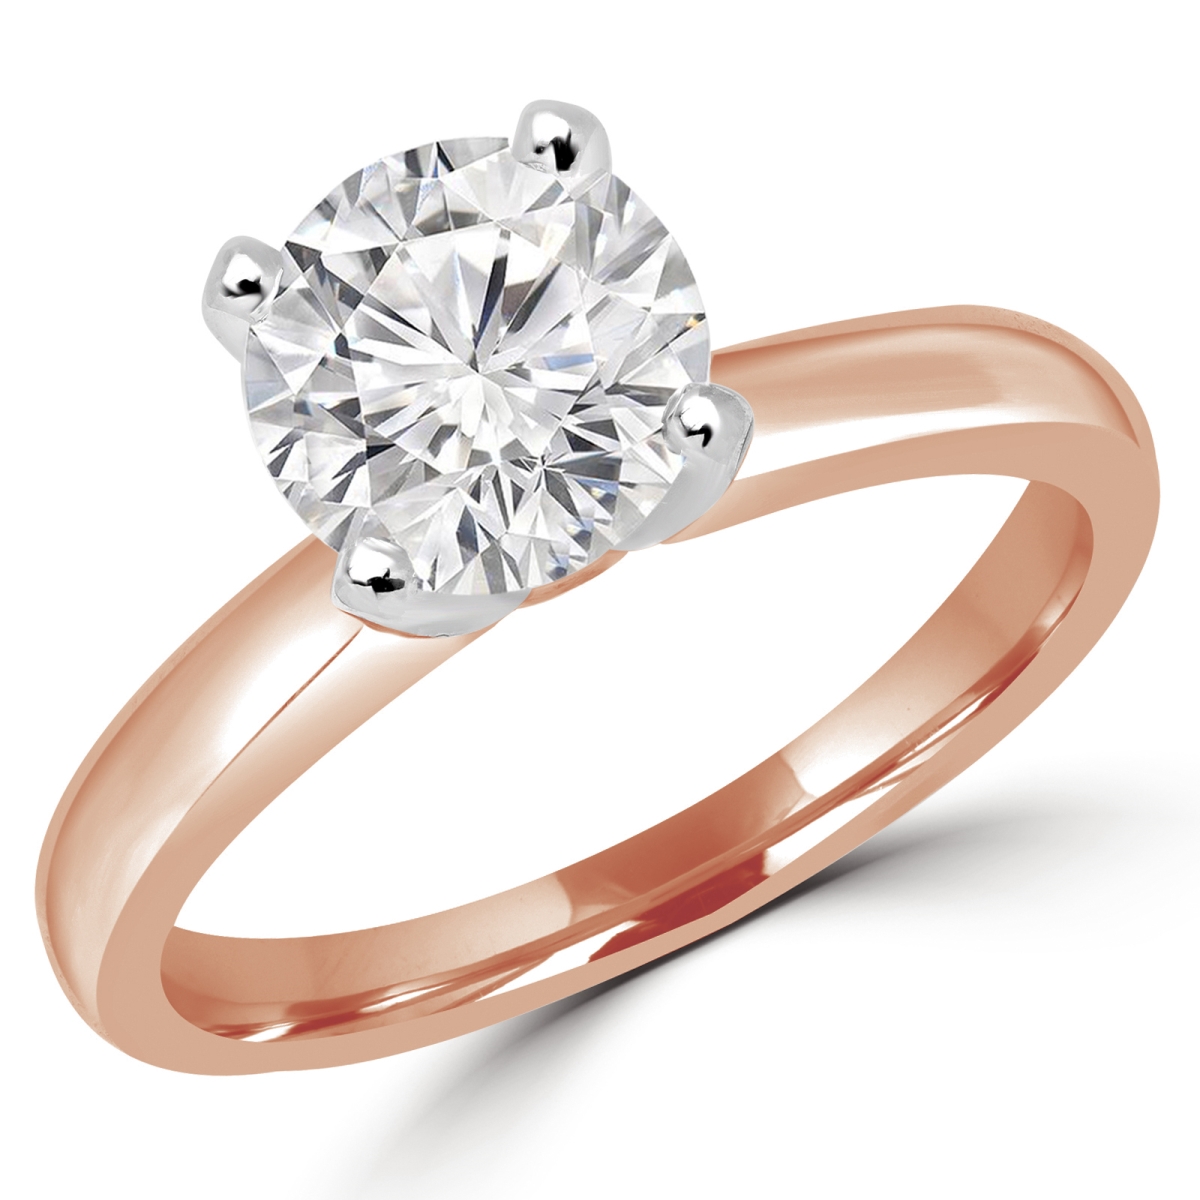 Picture of Majesty Diamonds MD180009-7.5 0.6 CT Round Diamond Solitaire Engagement Ring in 14K Rose Gold - Size 7.5